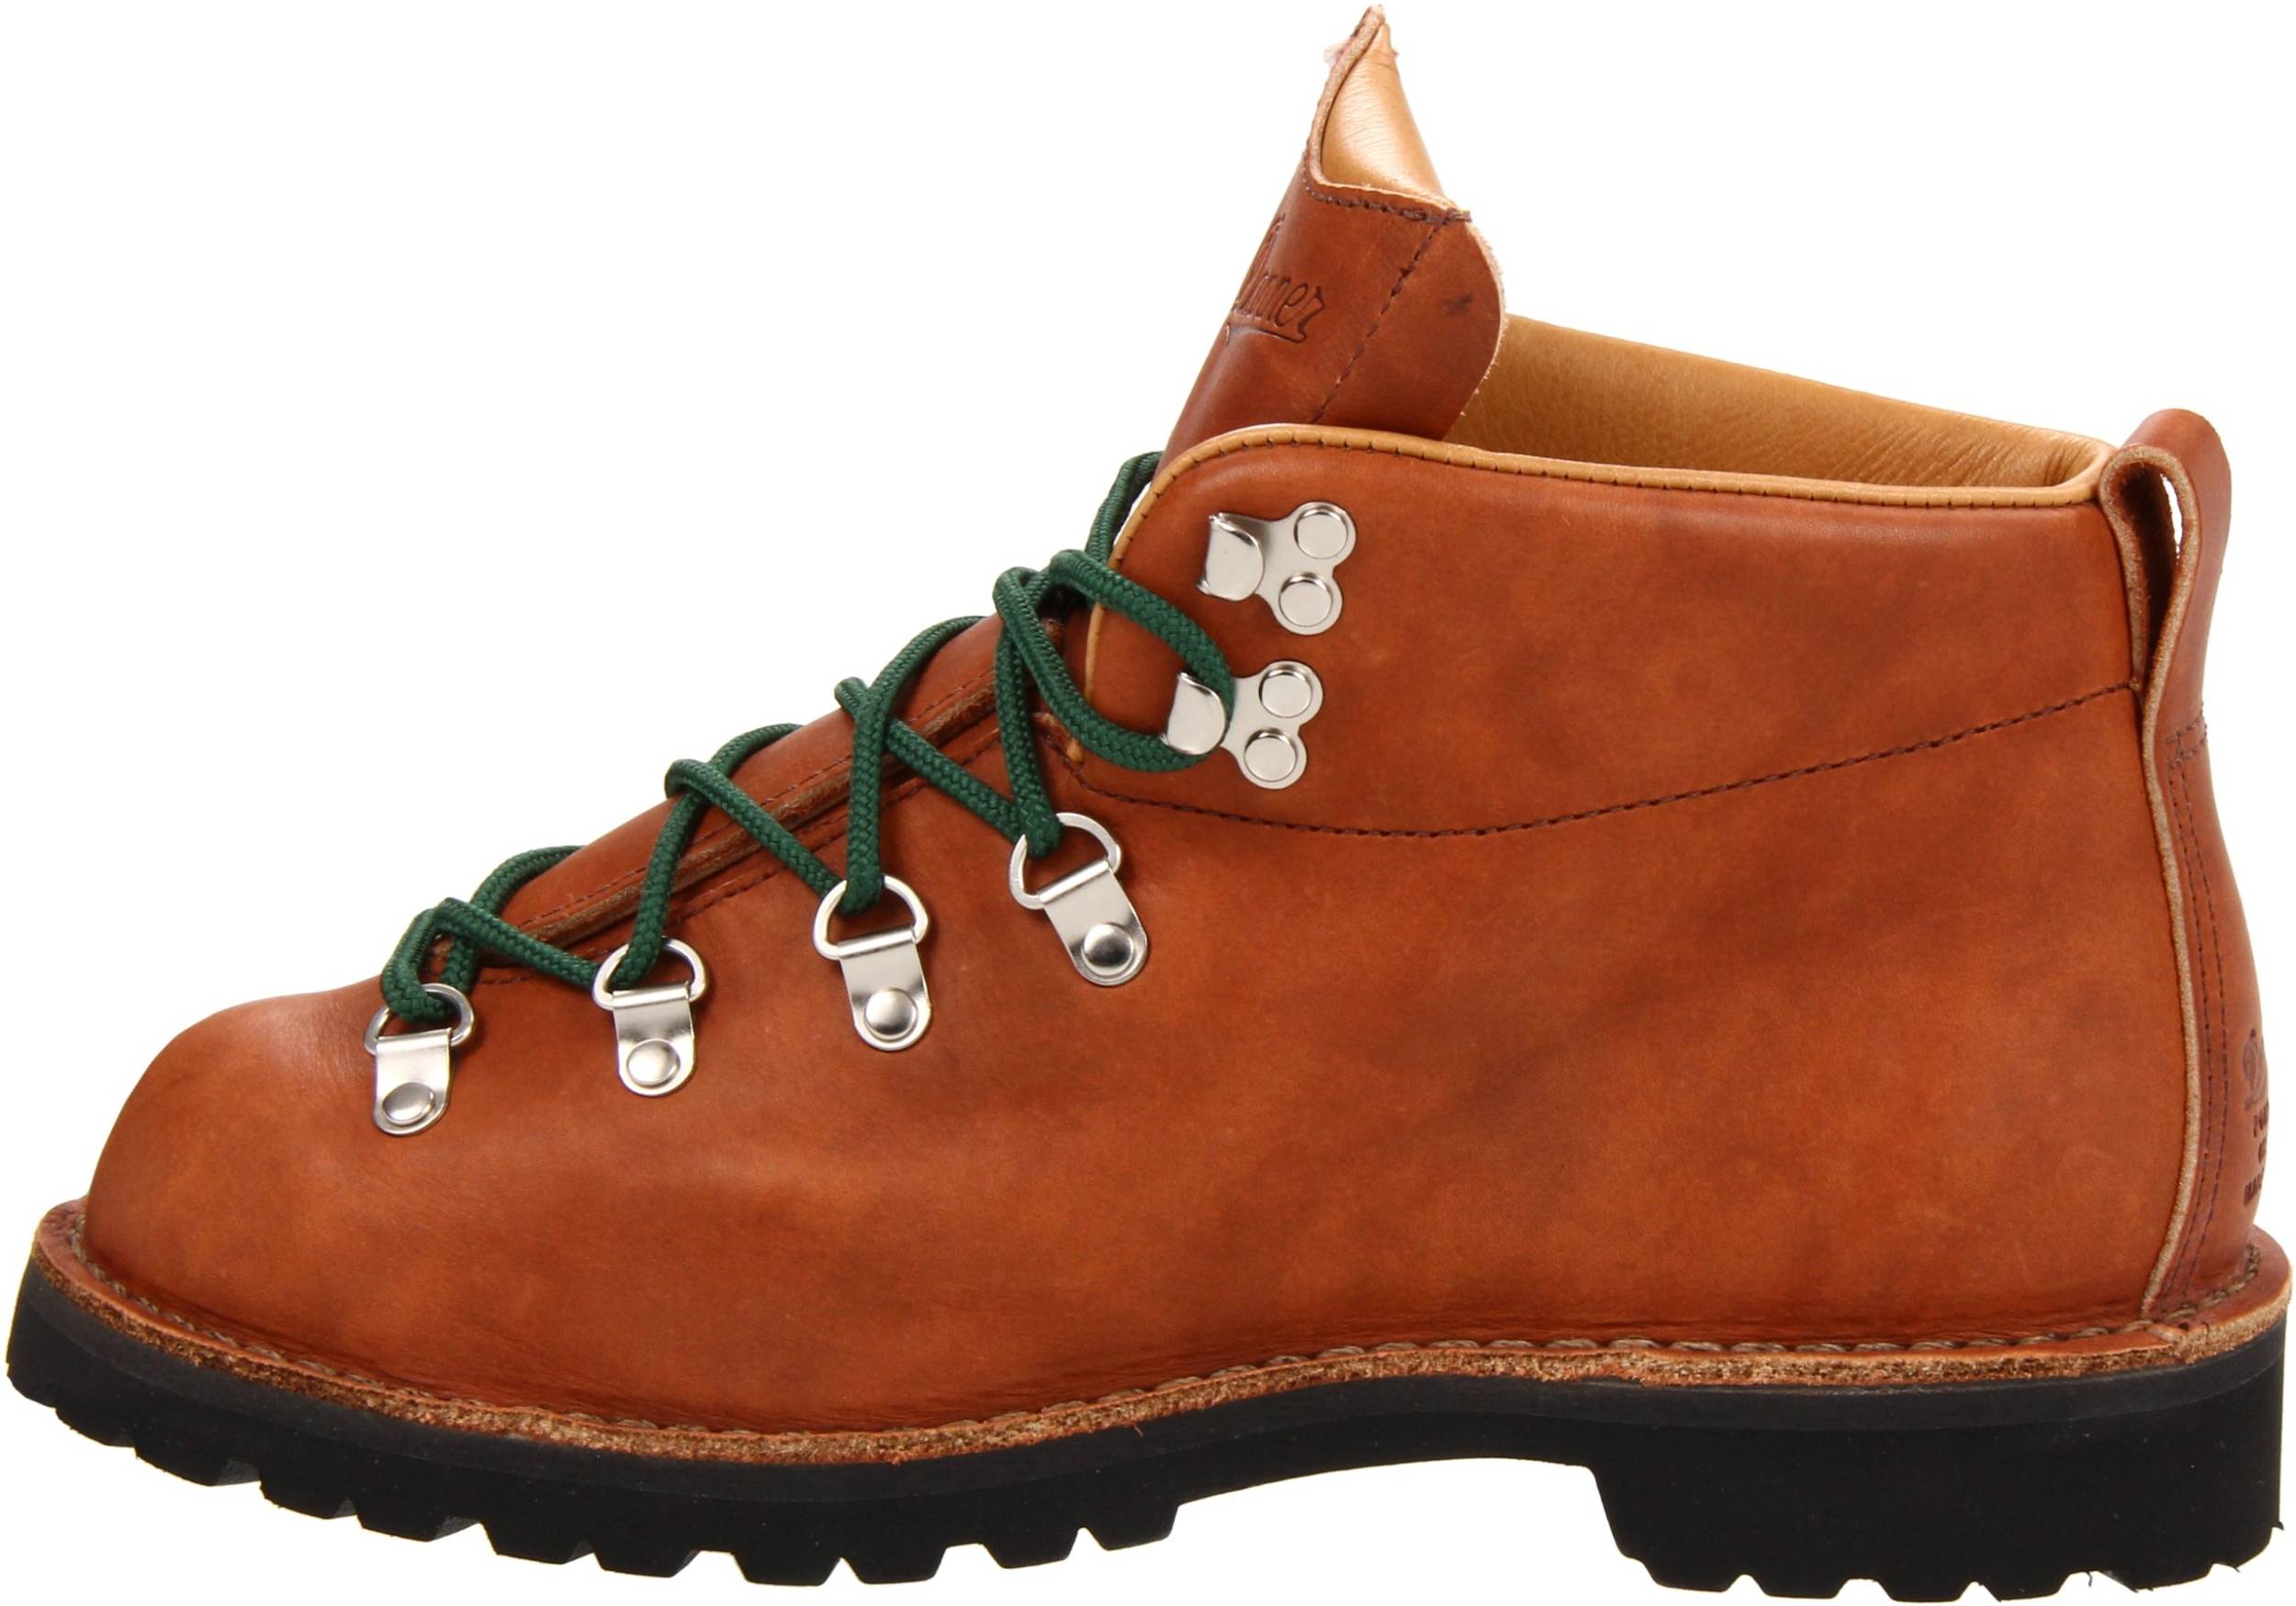 danner work boots on sale